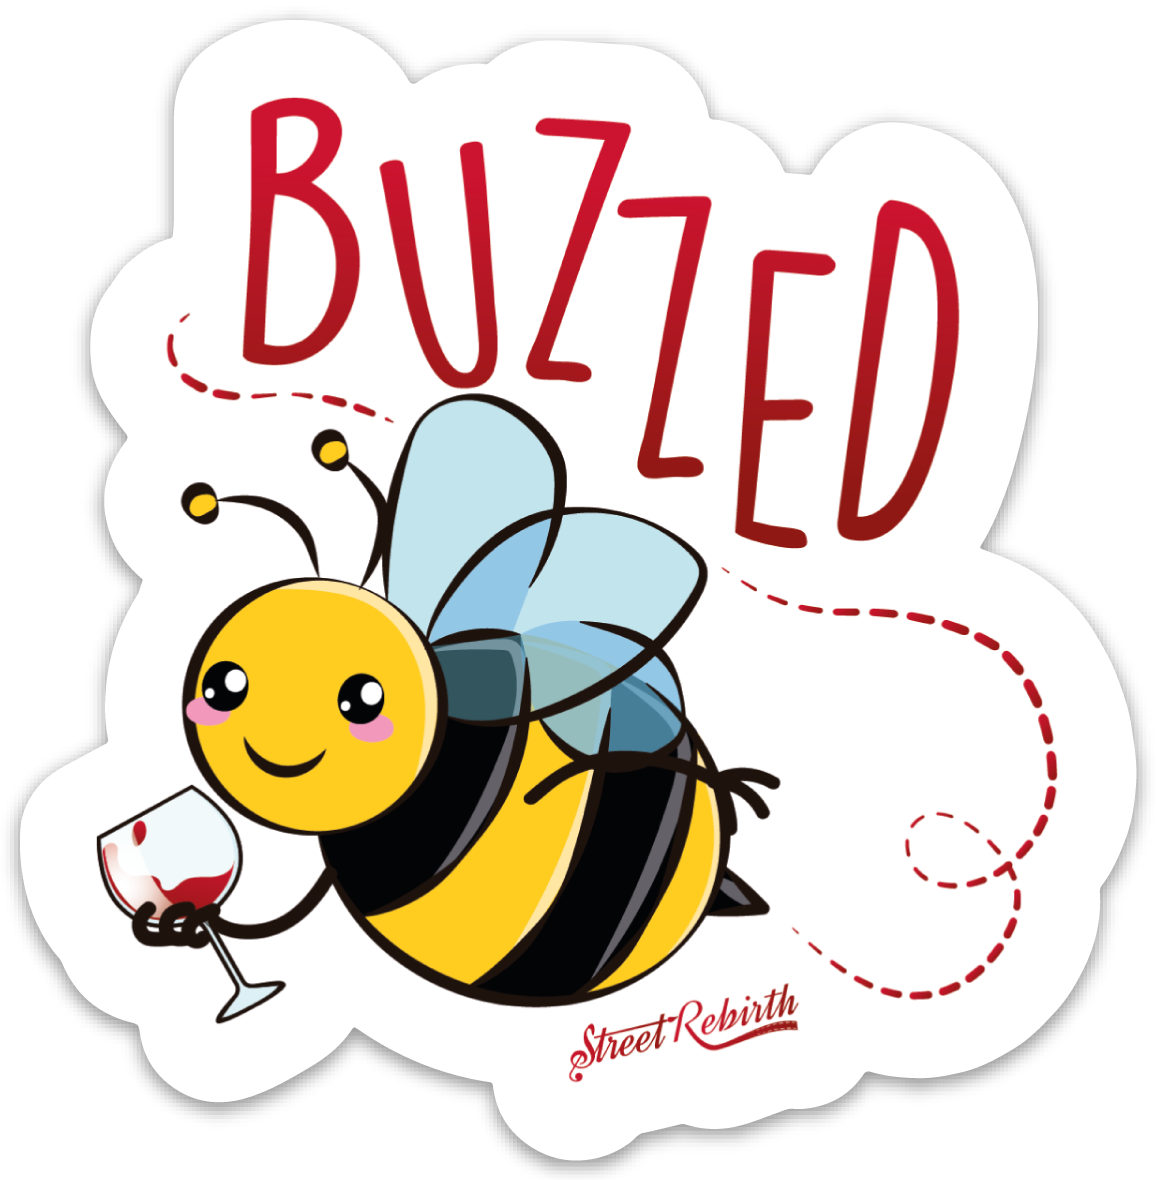 BUZZED PUN STICKER – ONE 4 INCH WATER PROOF VINYL STICKER – FOR HYDRO FLASK, SKATEBOARD, LAPTOP, PLANNER, CAR, COLLECTING, GIFTING